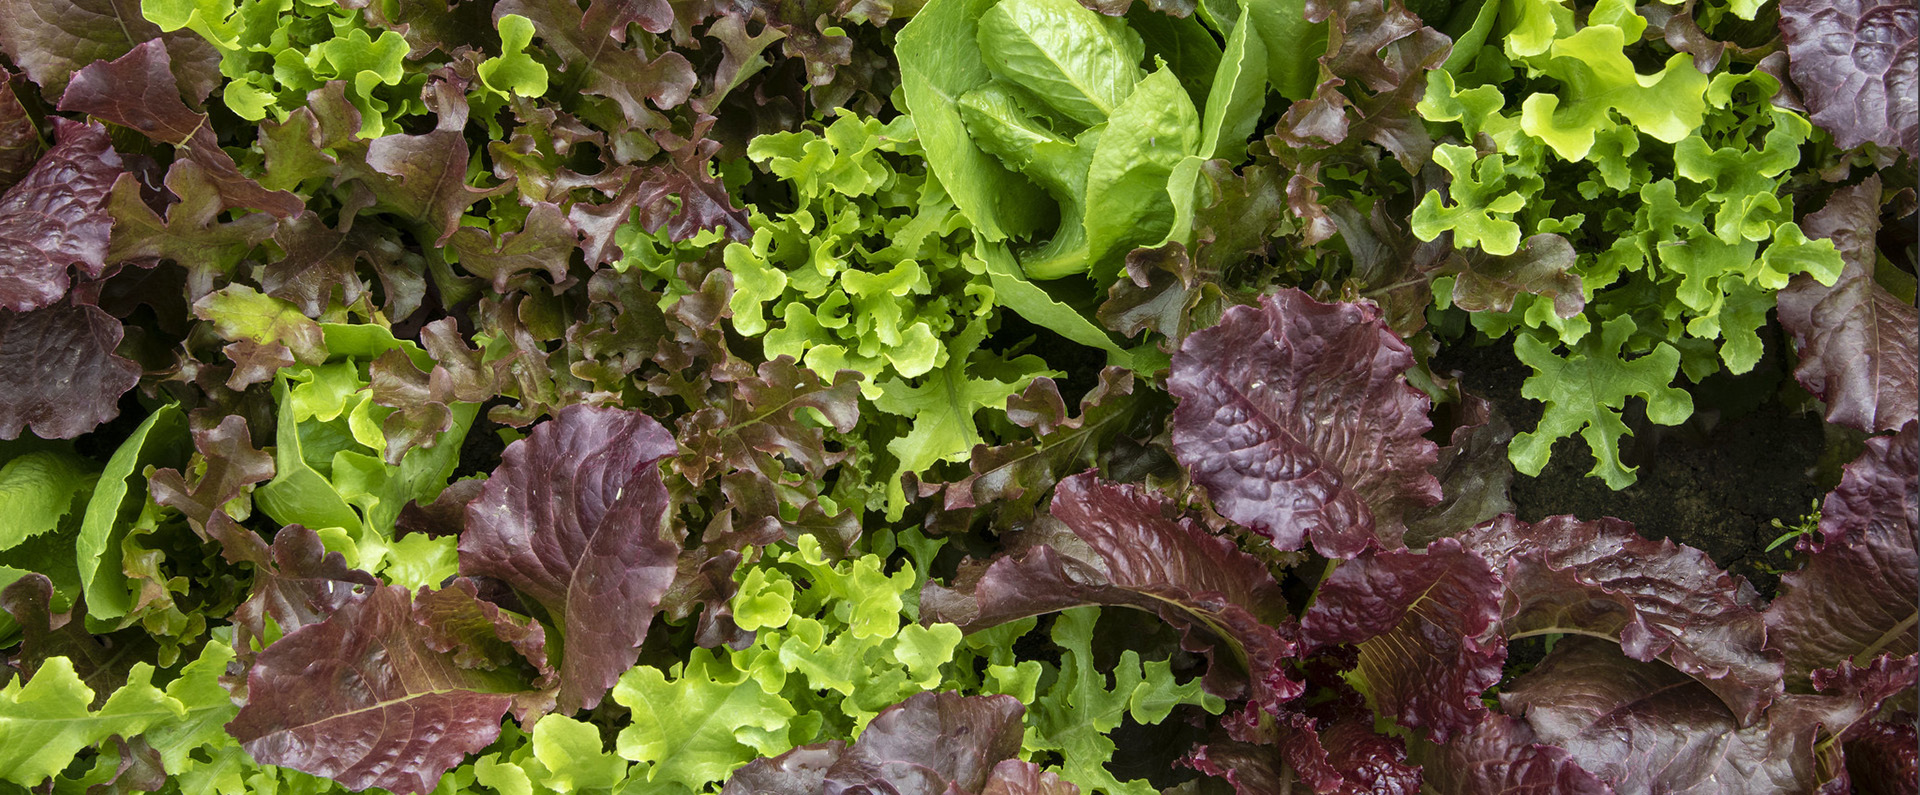 Red and green lettuce leaves